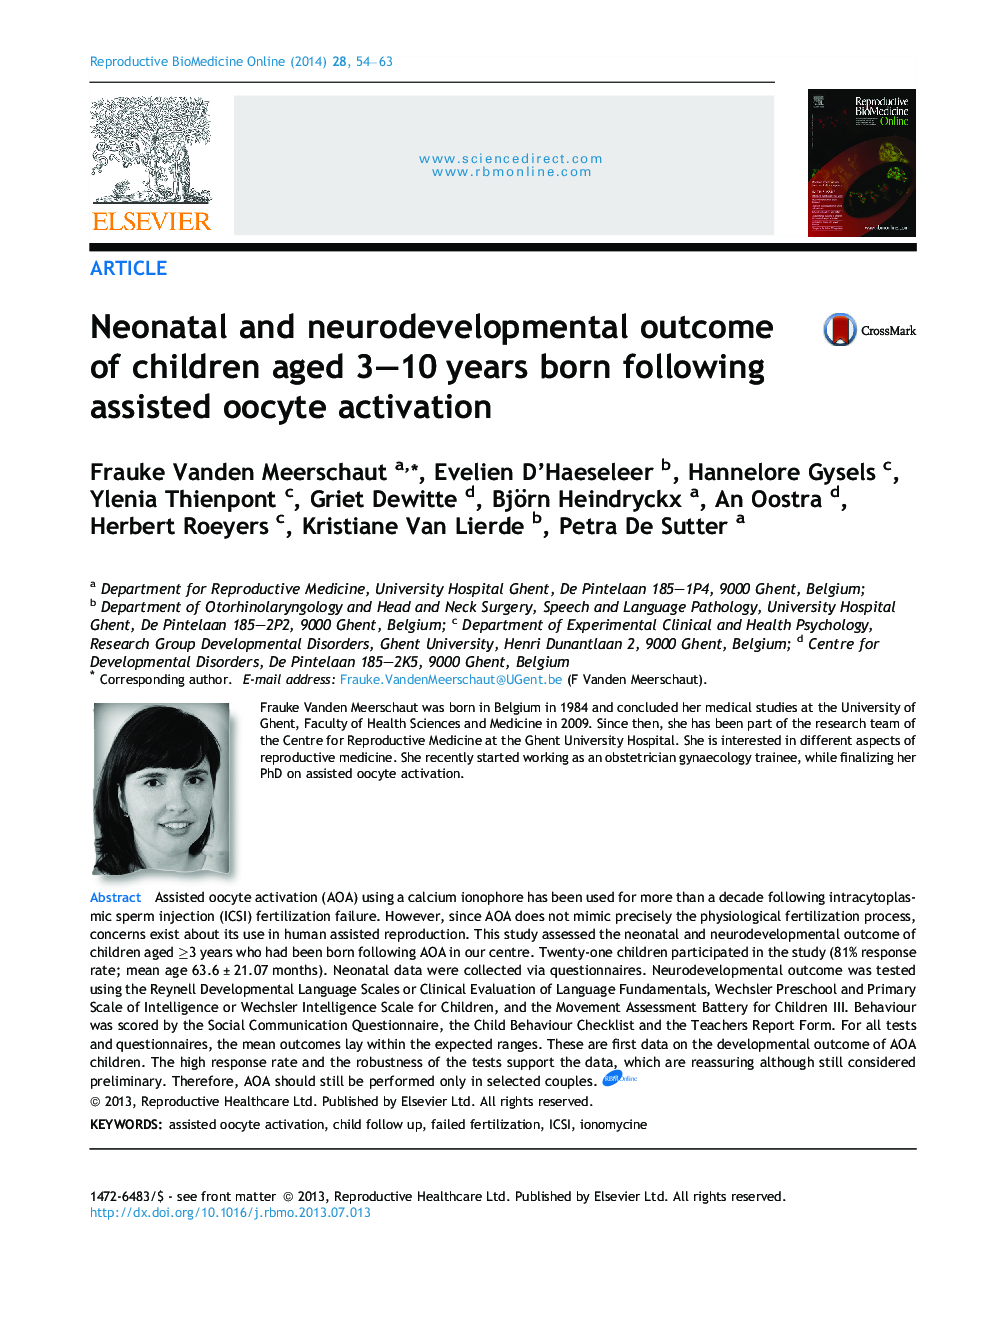 Neonatal and neurodevelopmental outcome of children aged 3–10 years born following assisted oocyte activation 